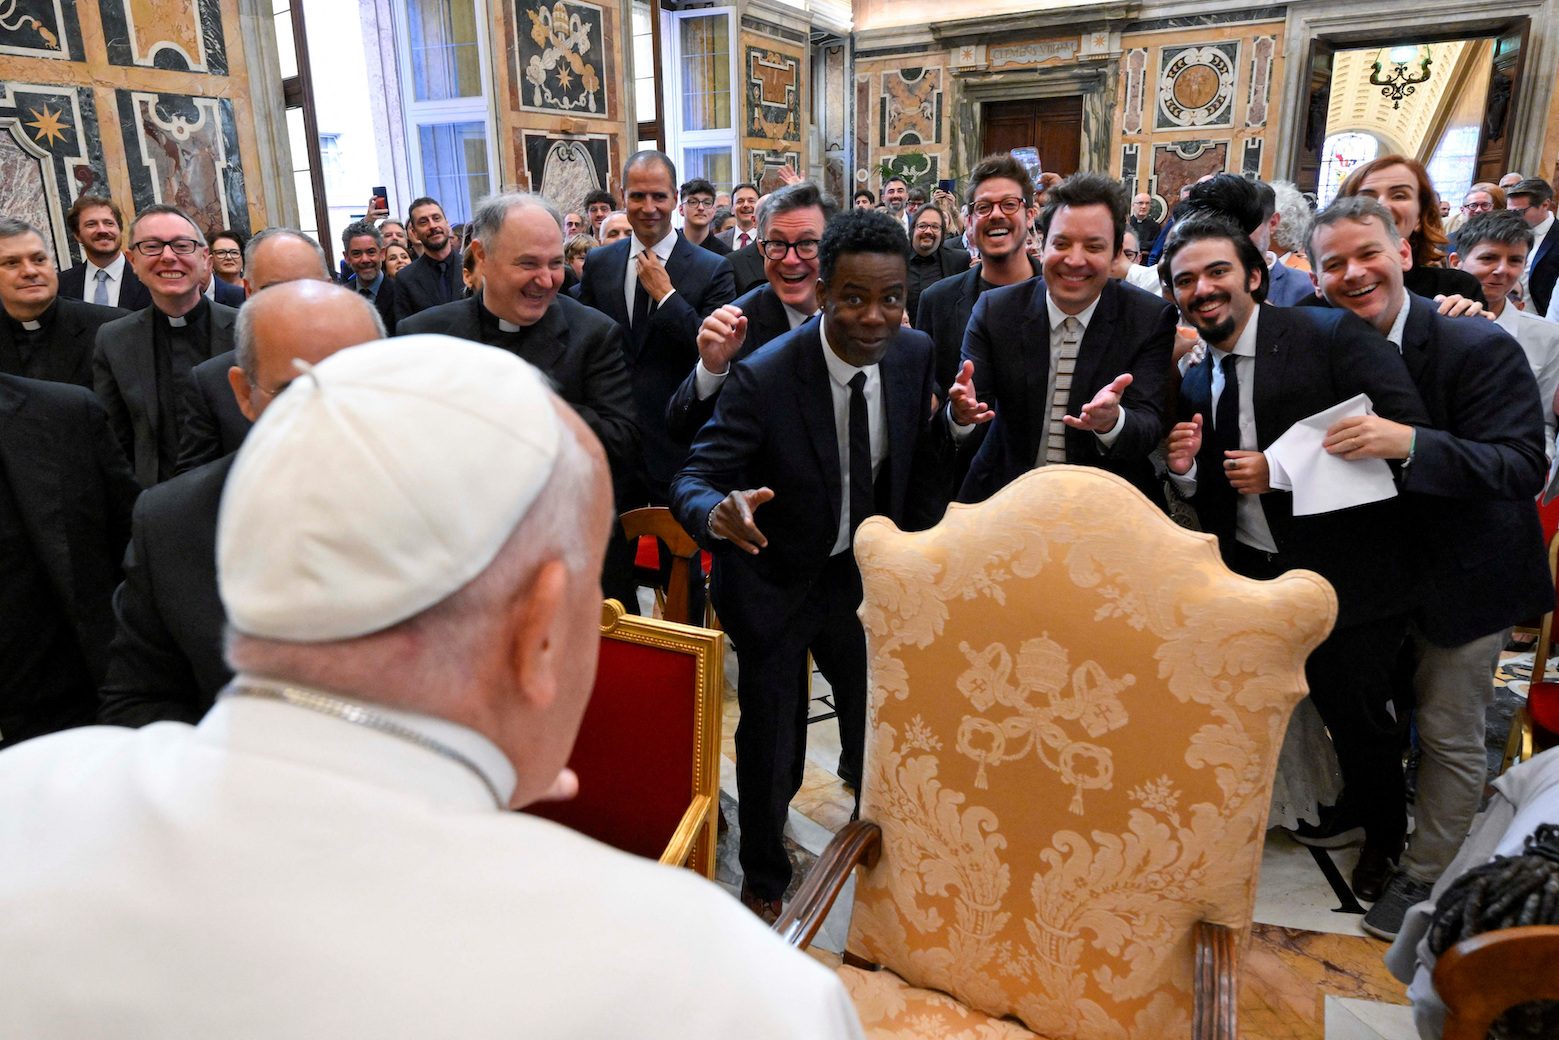 Pope Francis’ Vatican invitation to comedians shows humor has deep roots in Catholic tradition